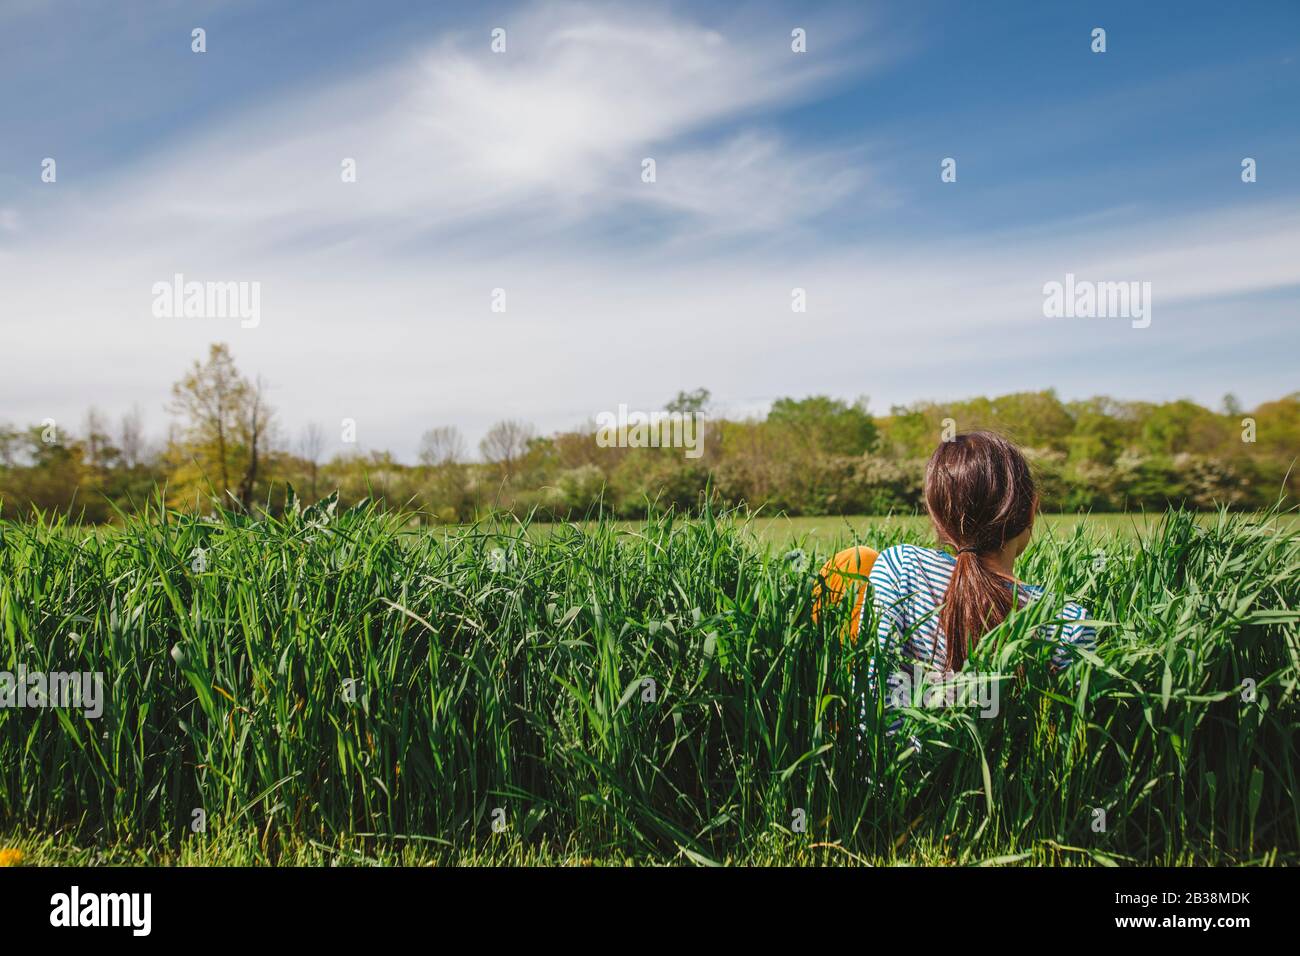 Rear view of girl sitting in tall grassy field against bright blue sky Stock Photo